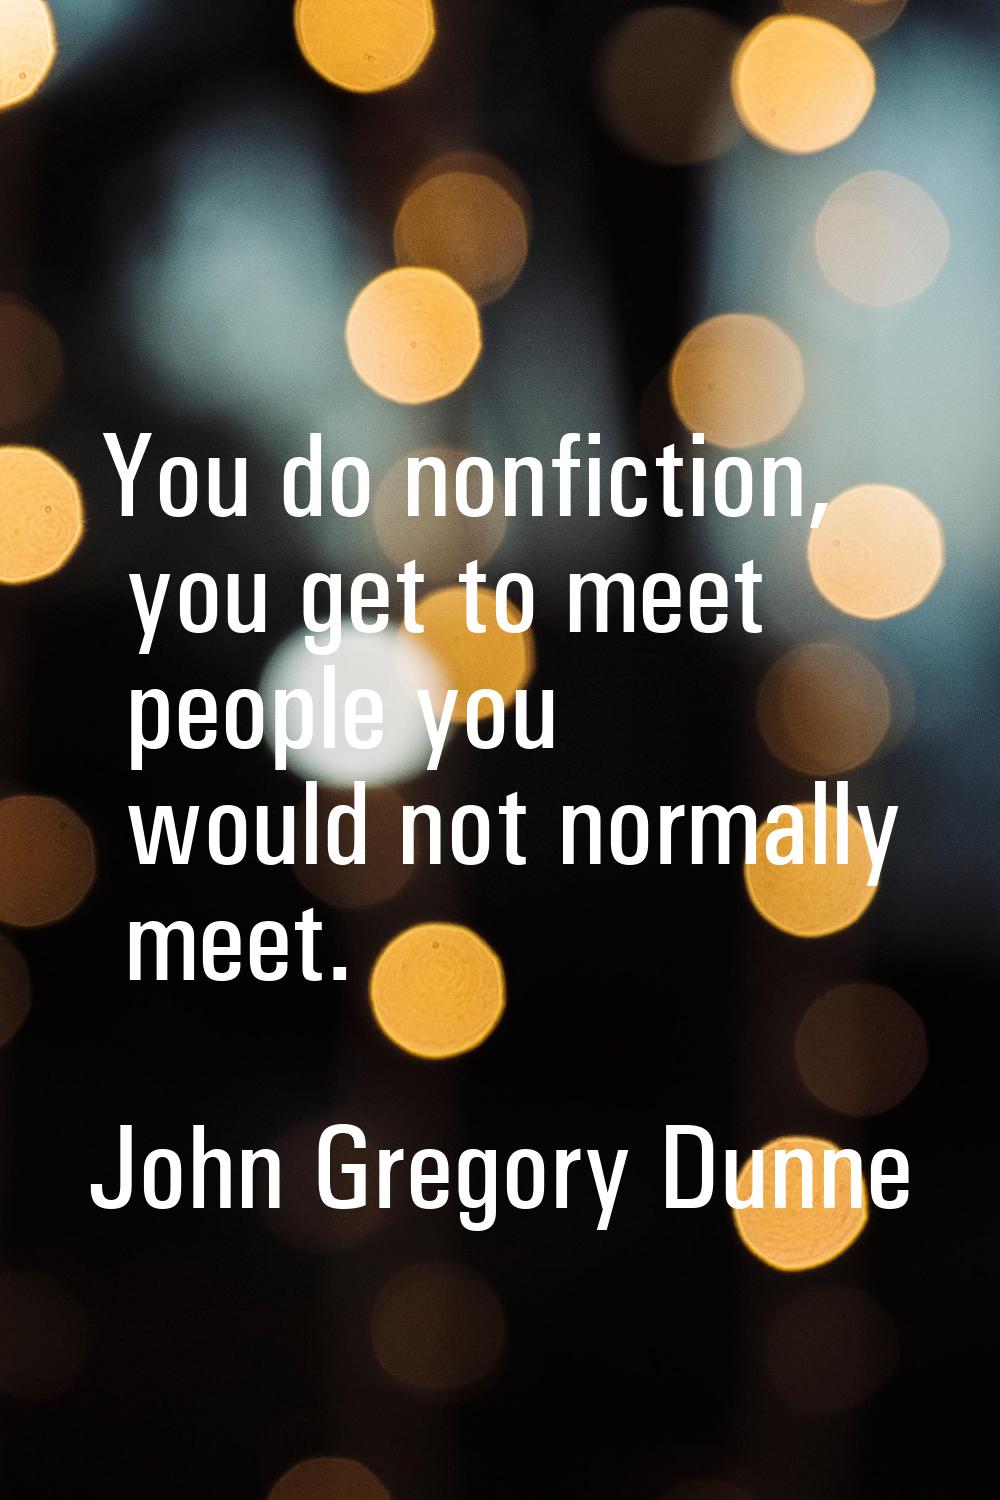 You do nonfiction, you get to meet people you would not normally meet.